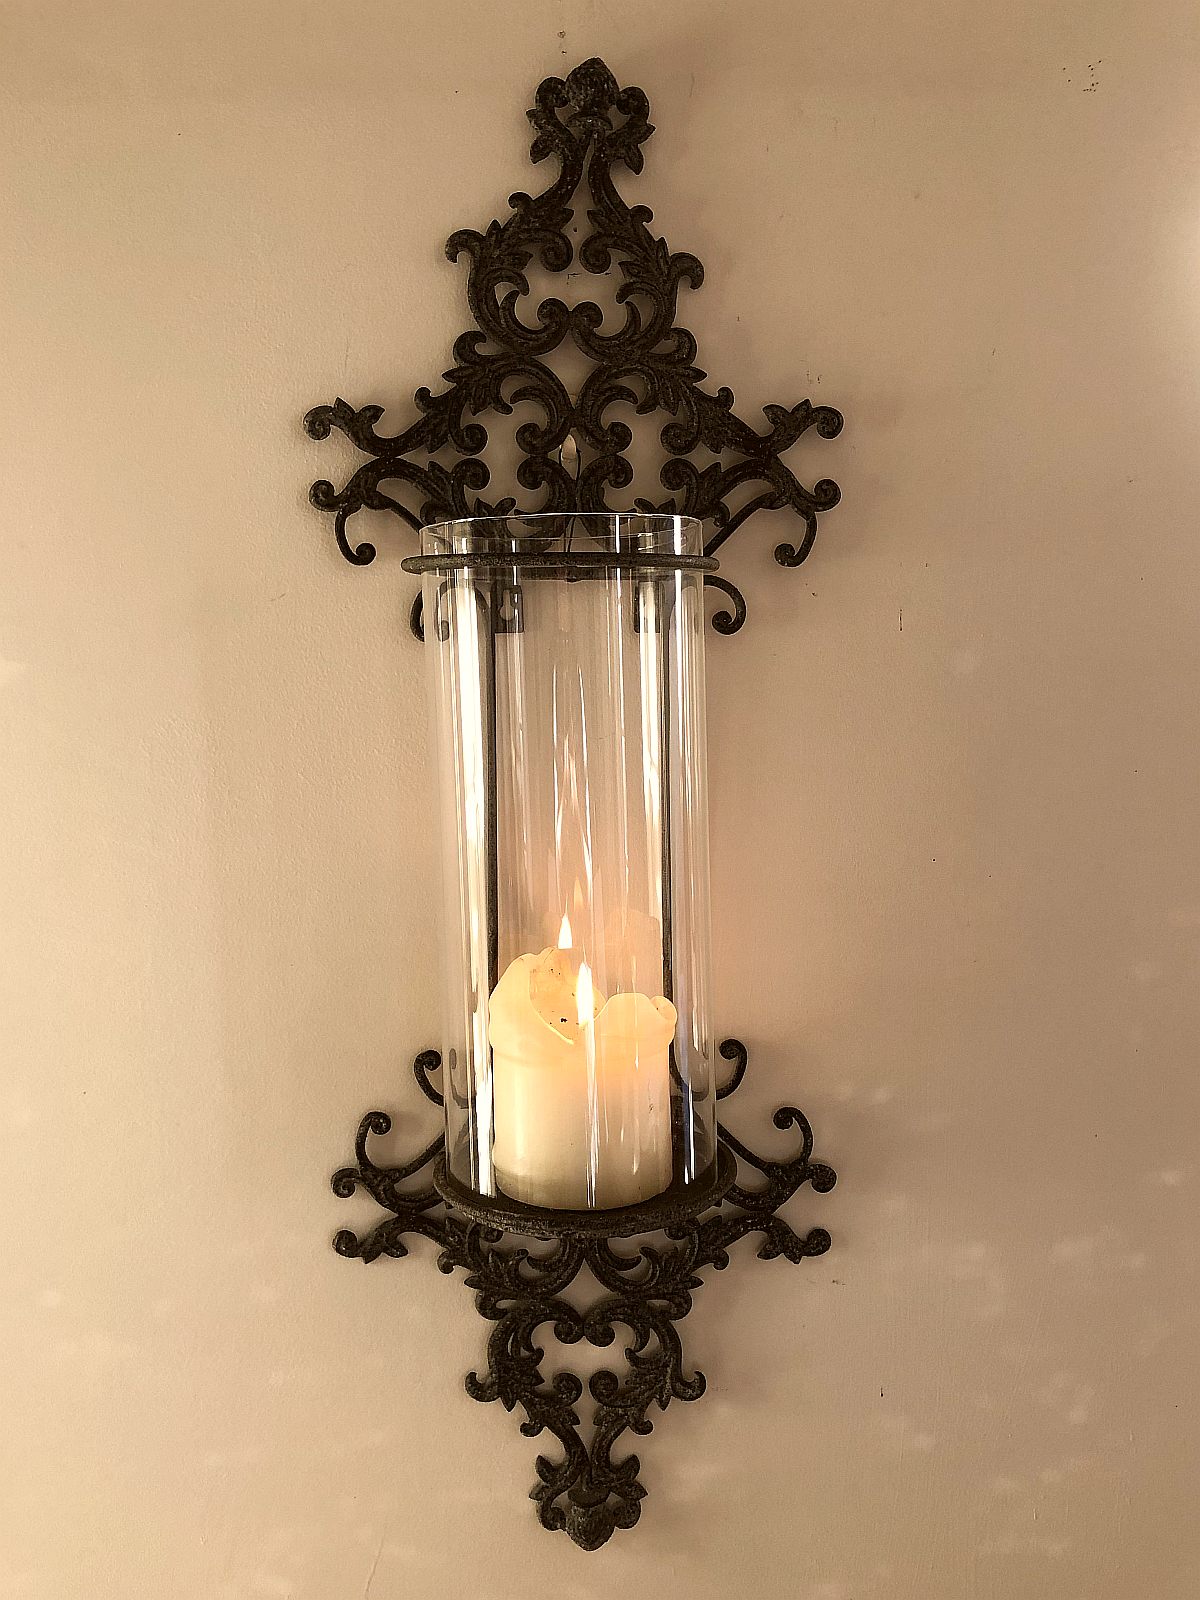 Black Ornate Wall Candle Sconces